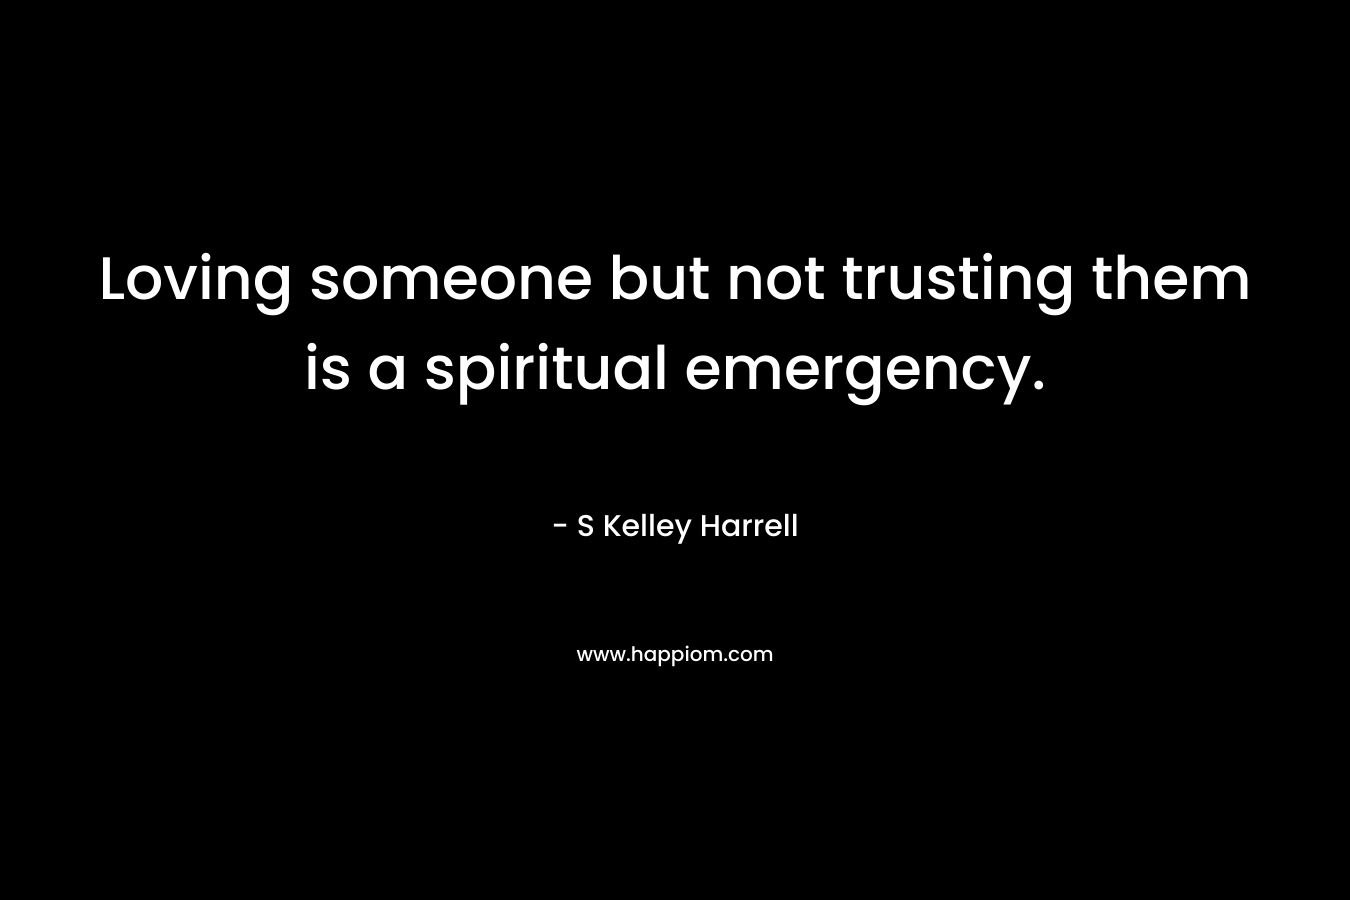 Loving someone but not trusting them is a spiritual emergency.